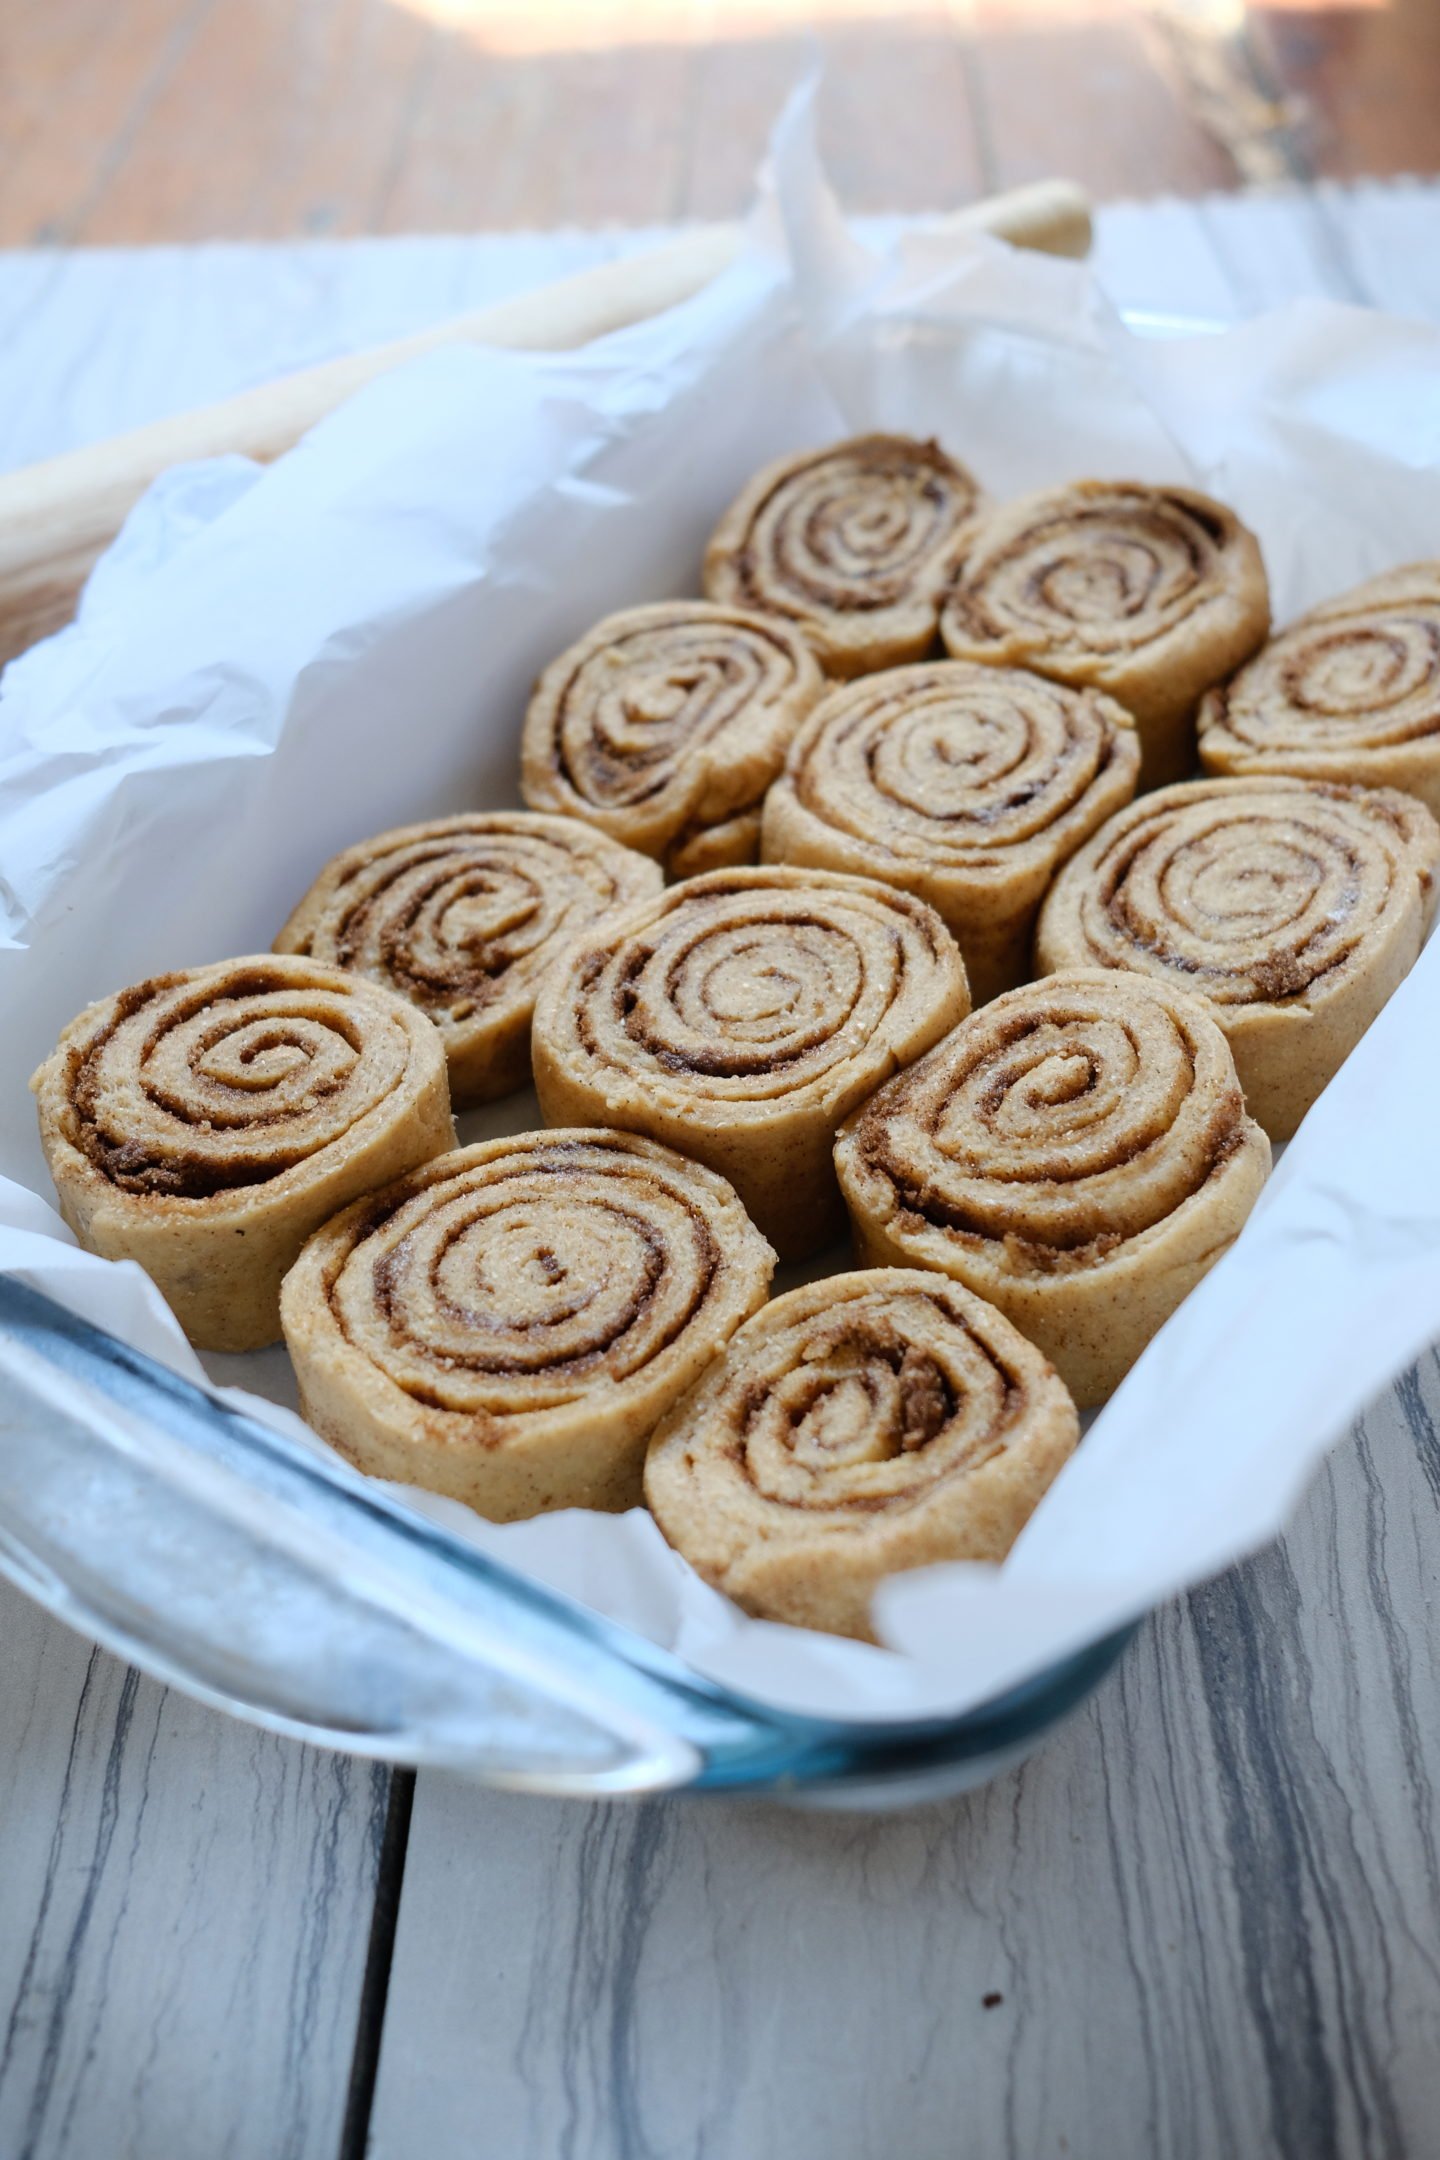 Lifestyle Blogger Chocolate & Lace shares her recipe for Cream Cheese Frosted Cinnamon Rolls.